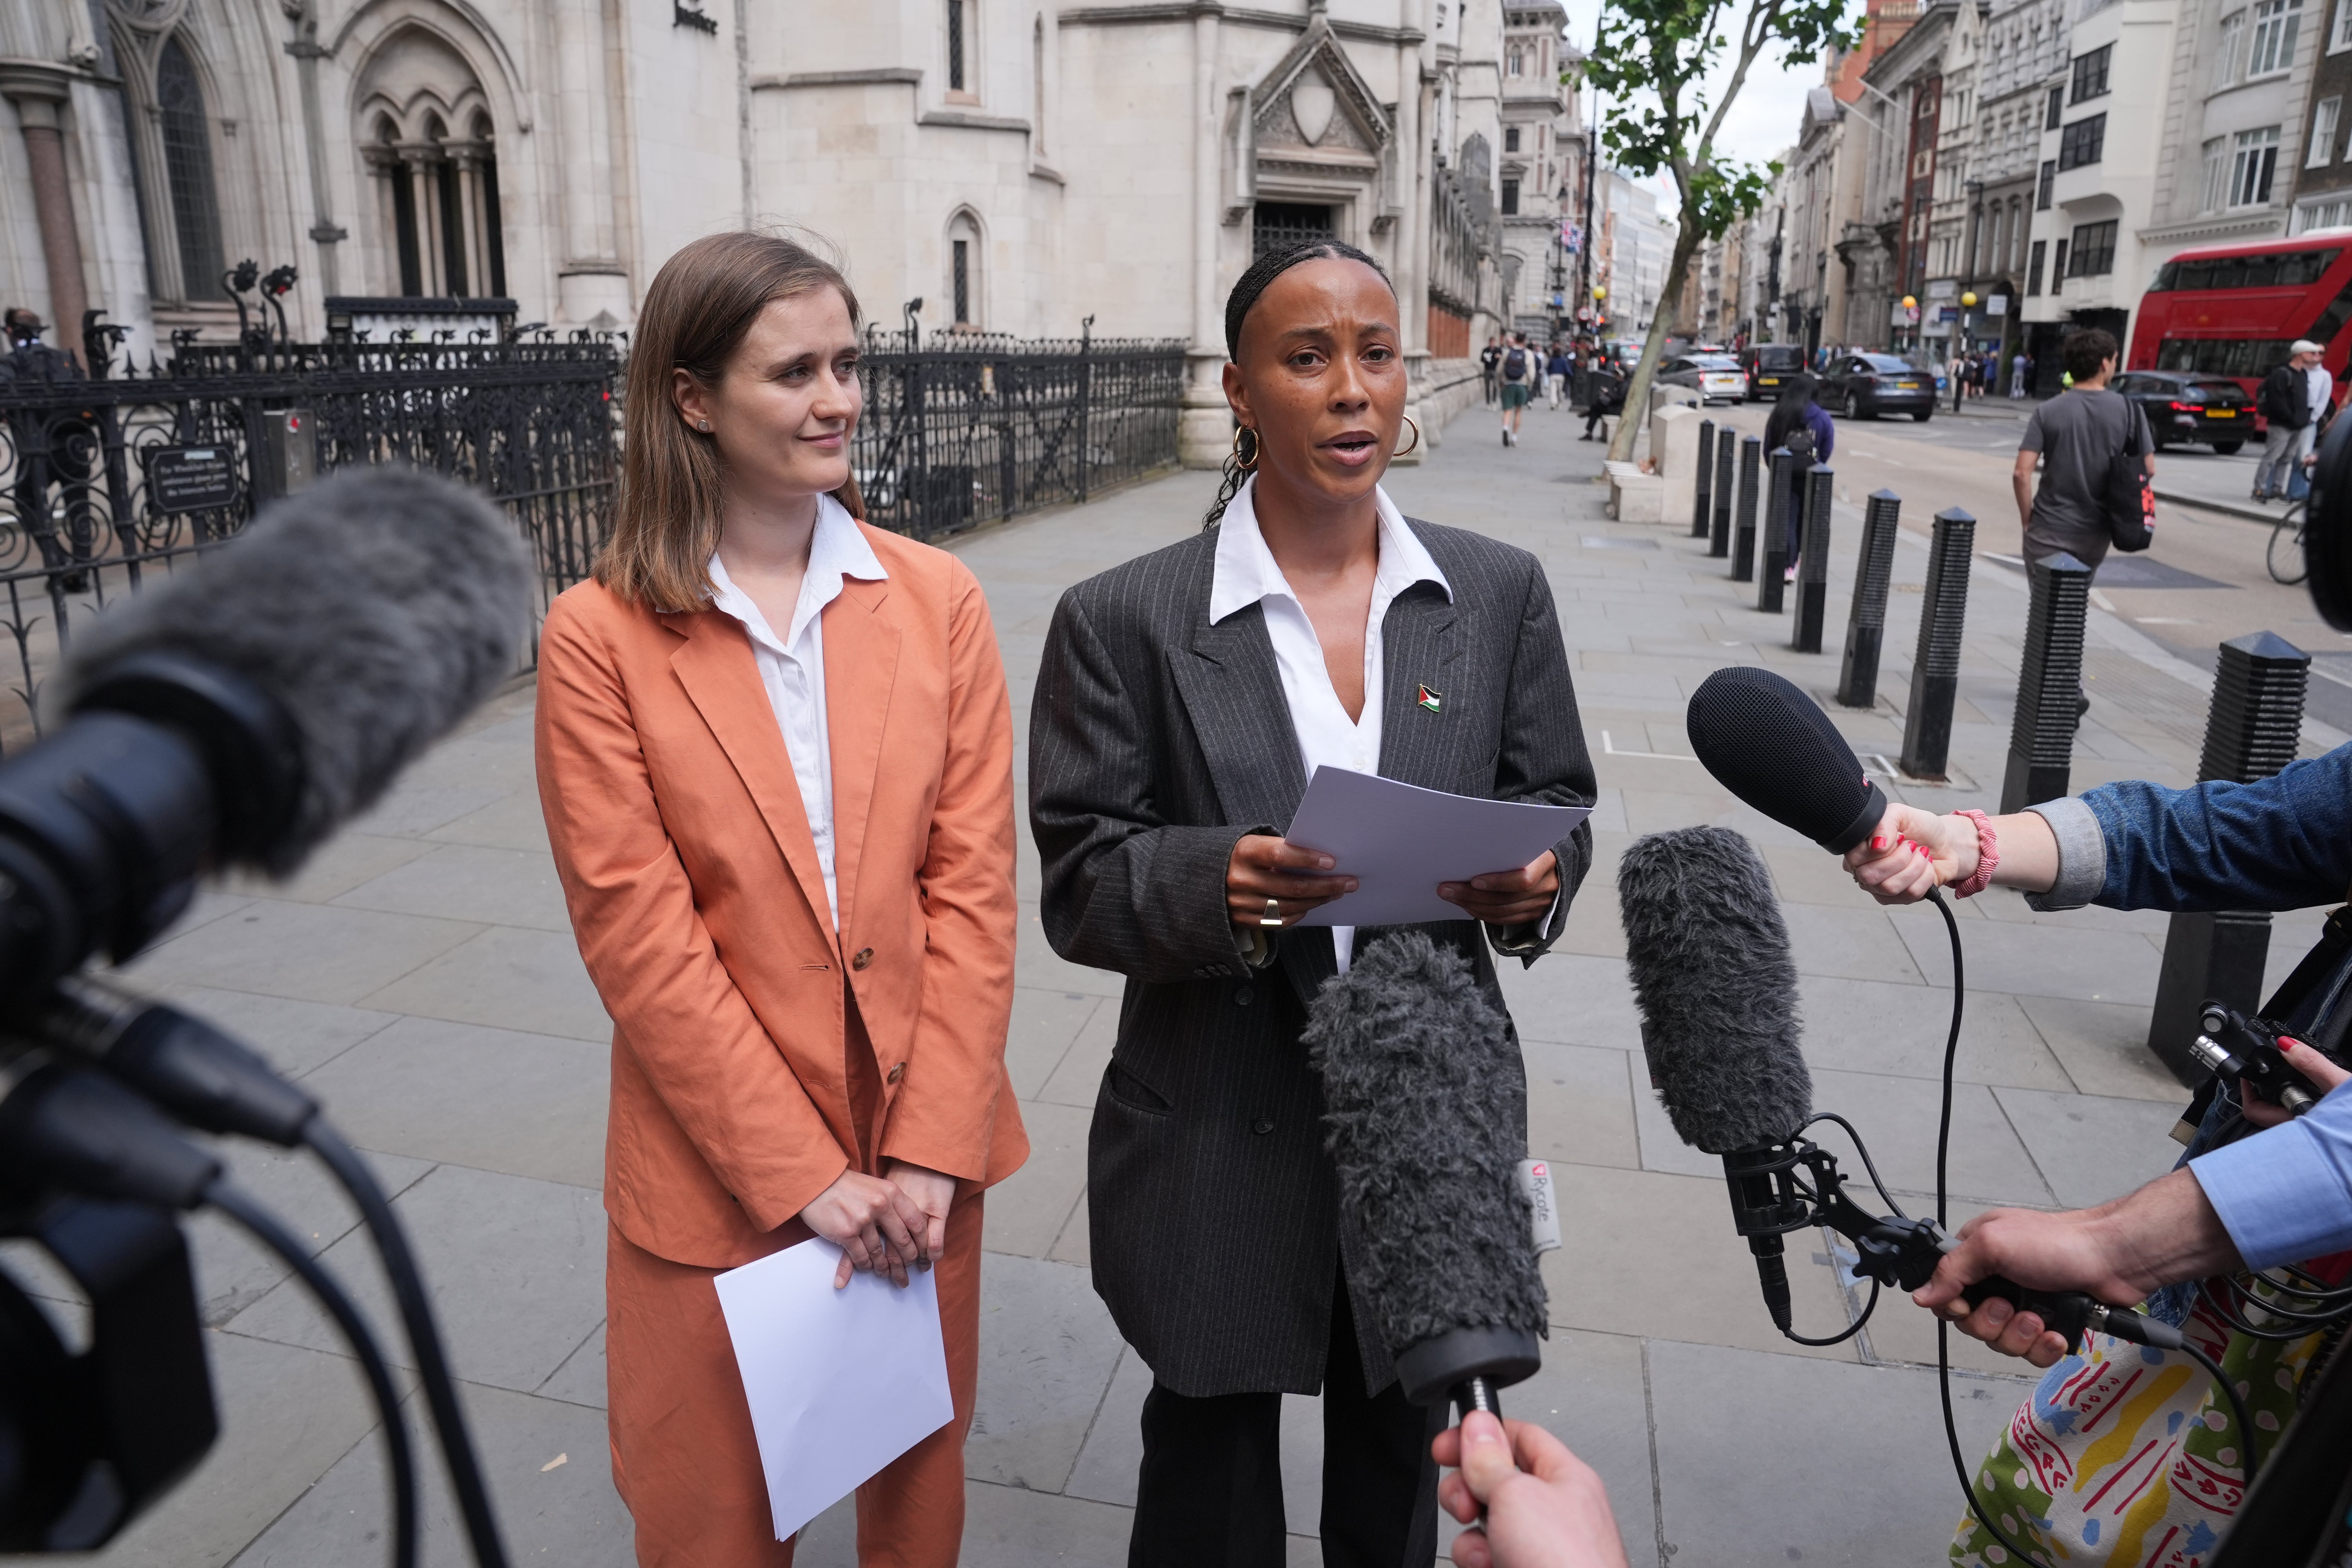 Ella Janneh and her lawyer Catriona Rubens from Leigh day outside of the Royal Courts of Justice